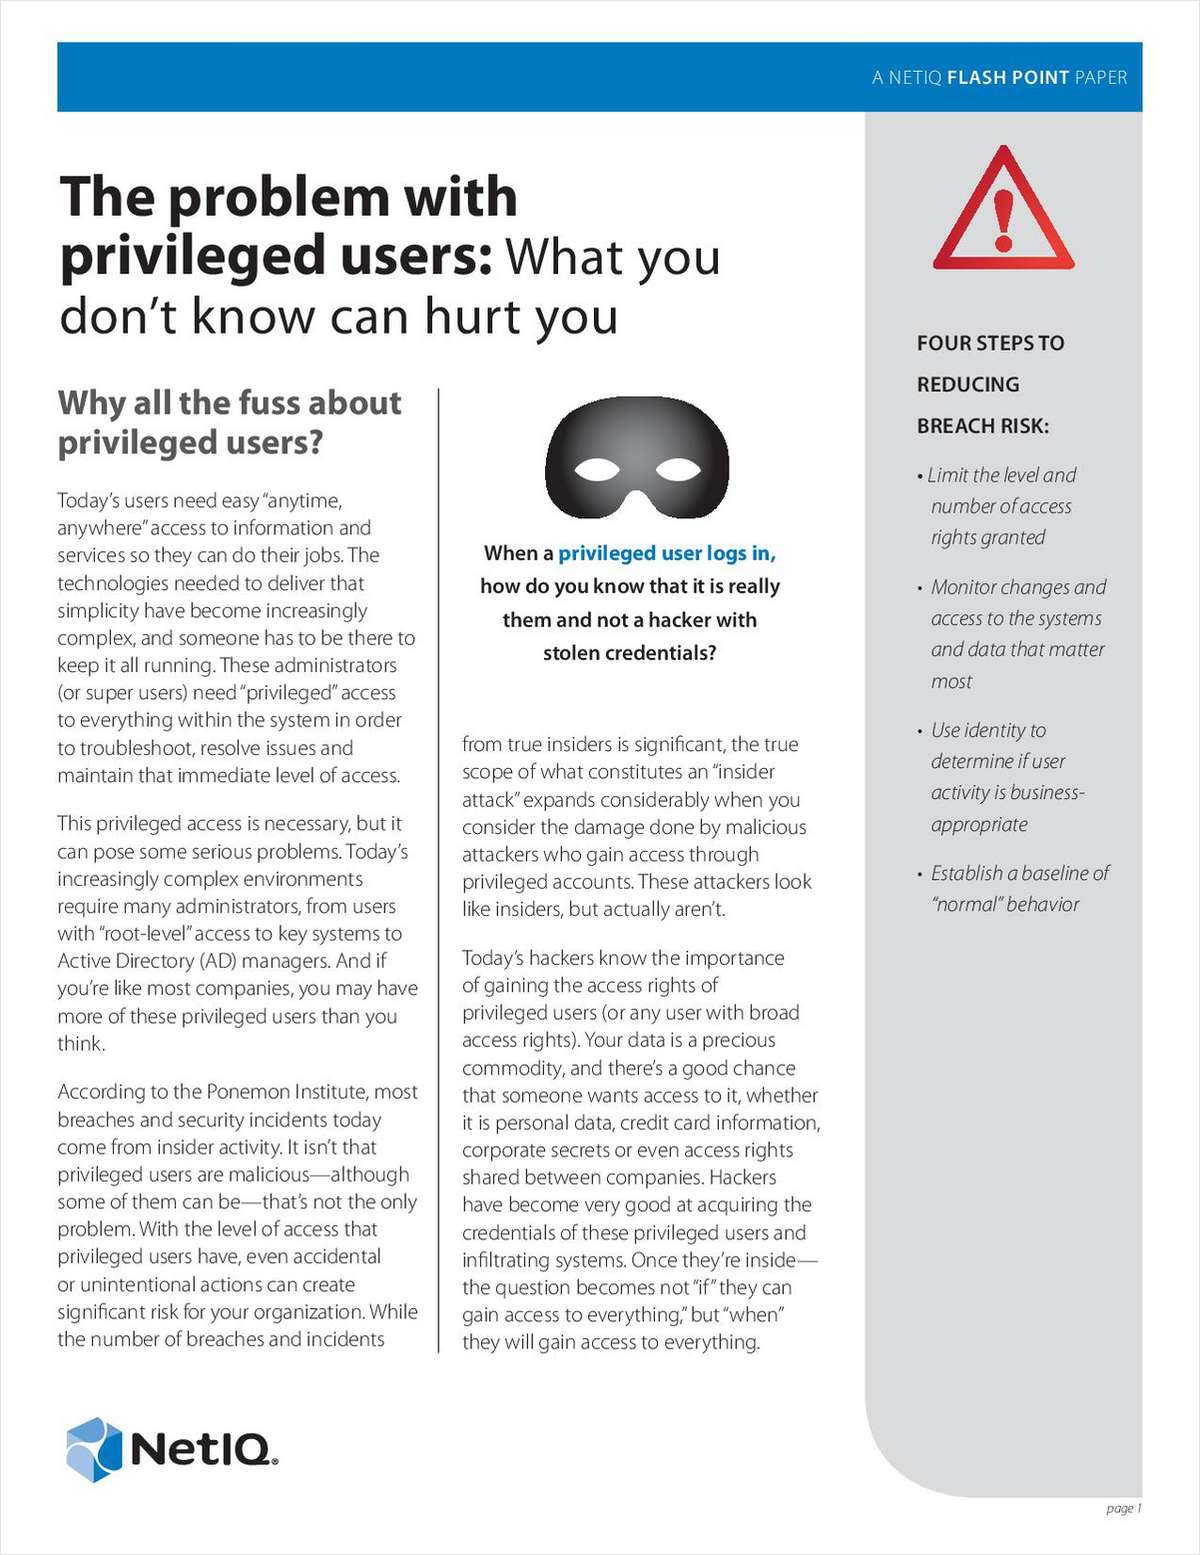 The Problem with Privileged Users: What You Don't Know Can Hurt You